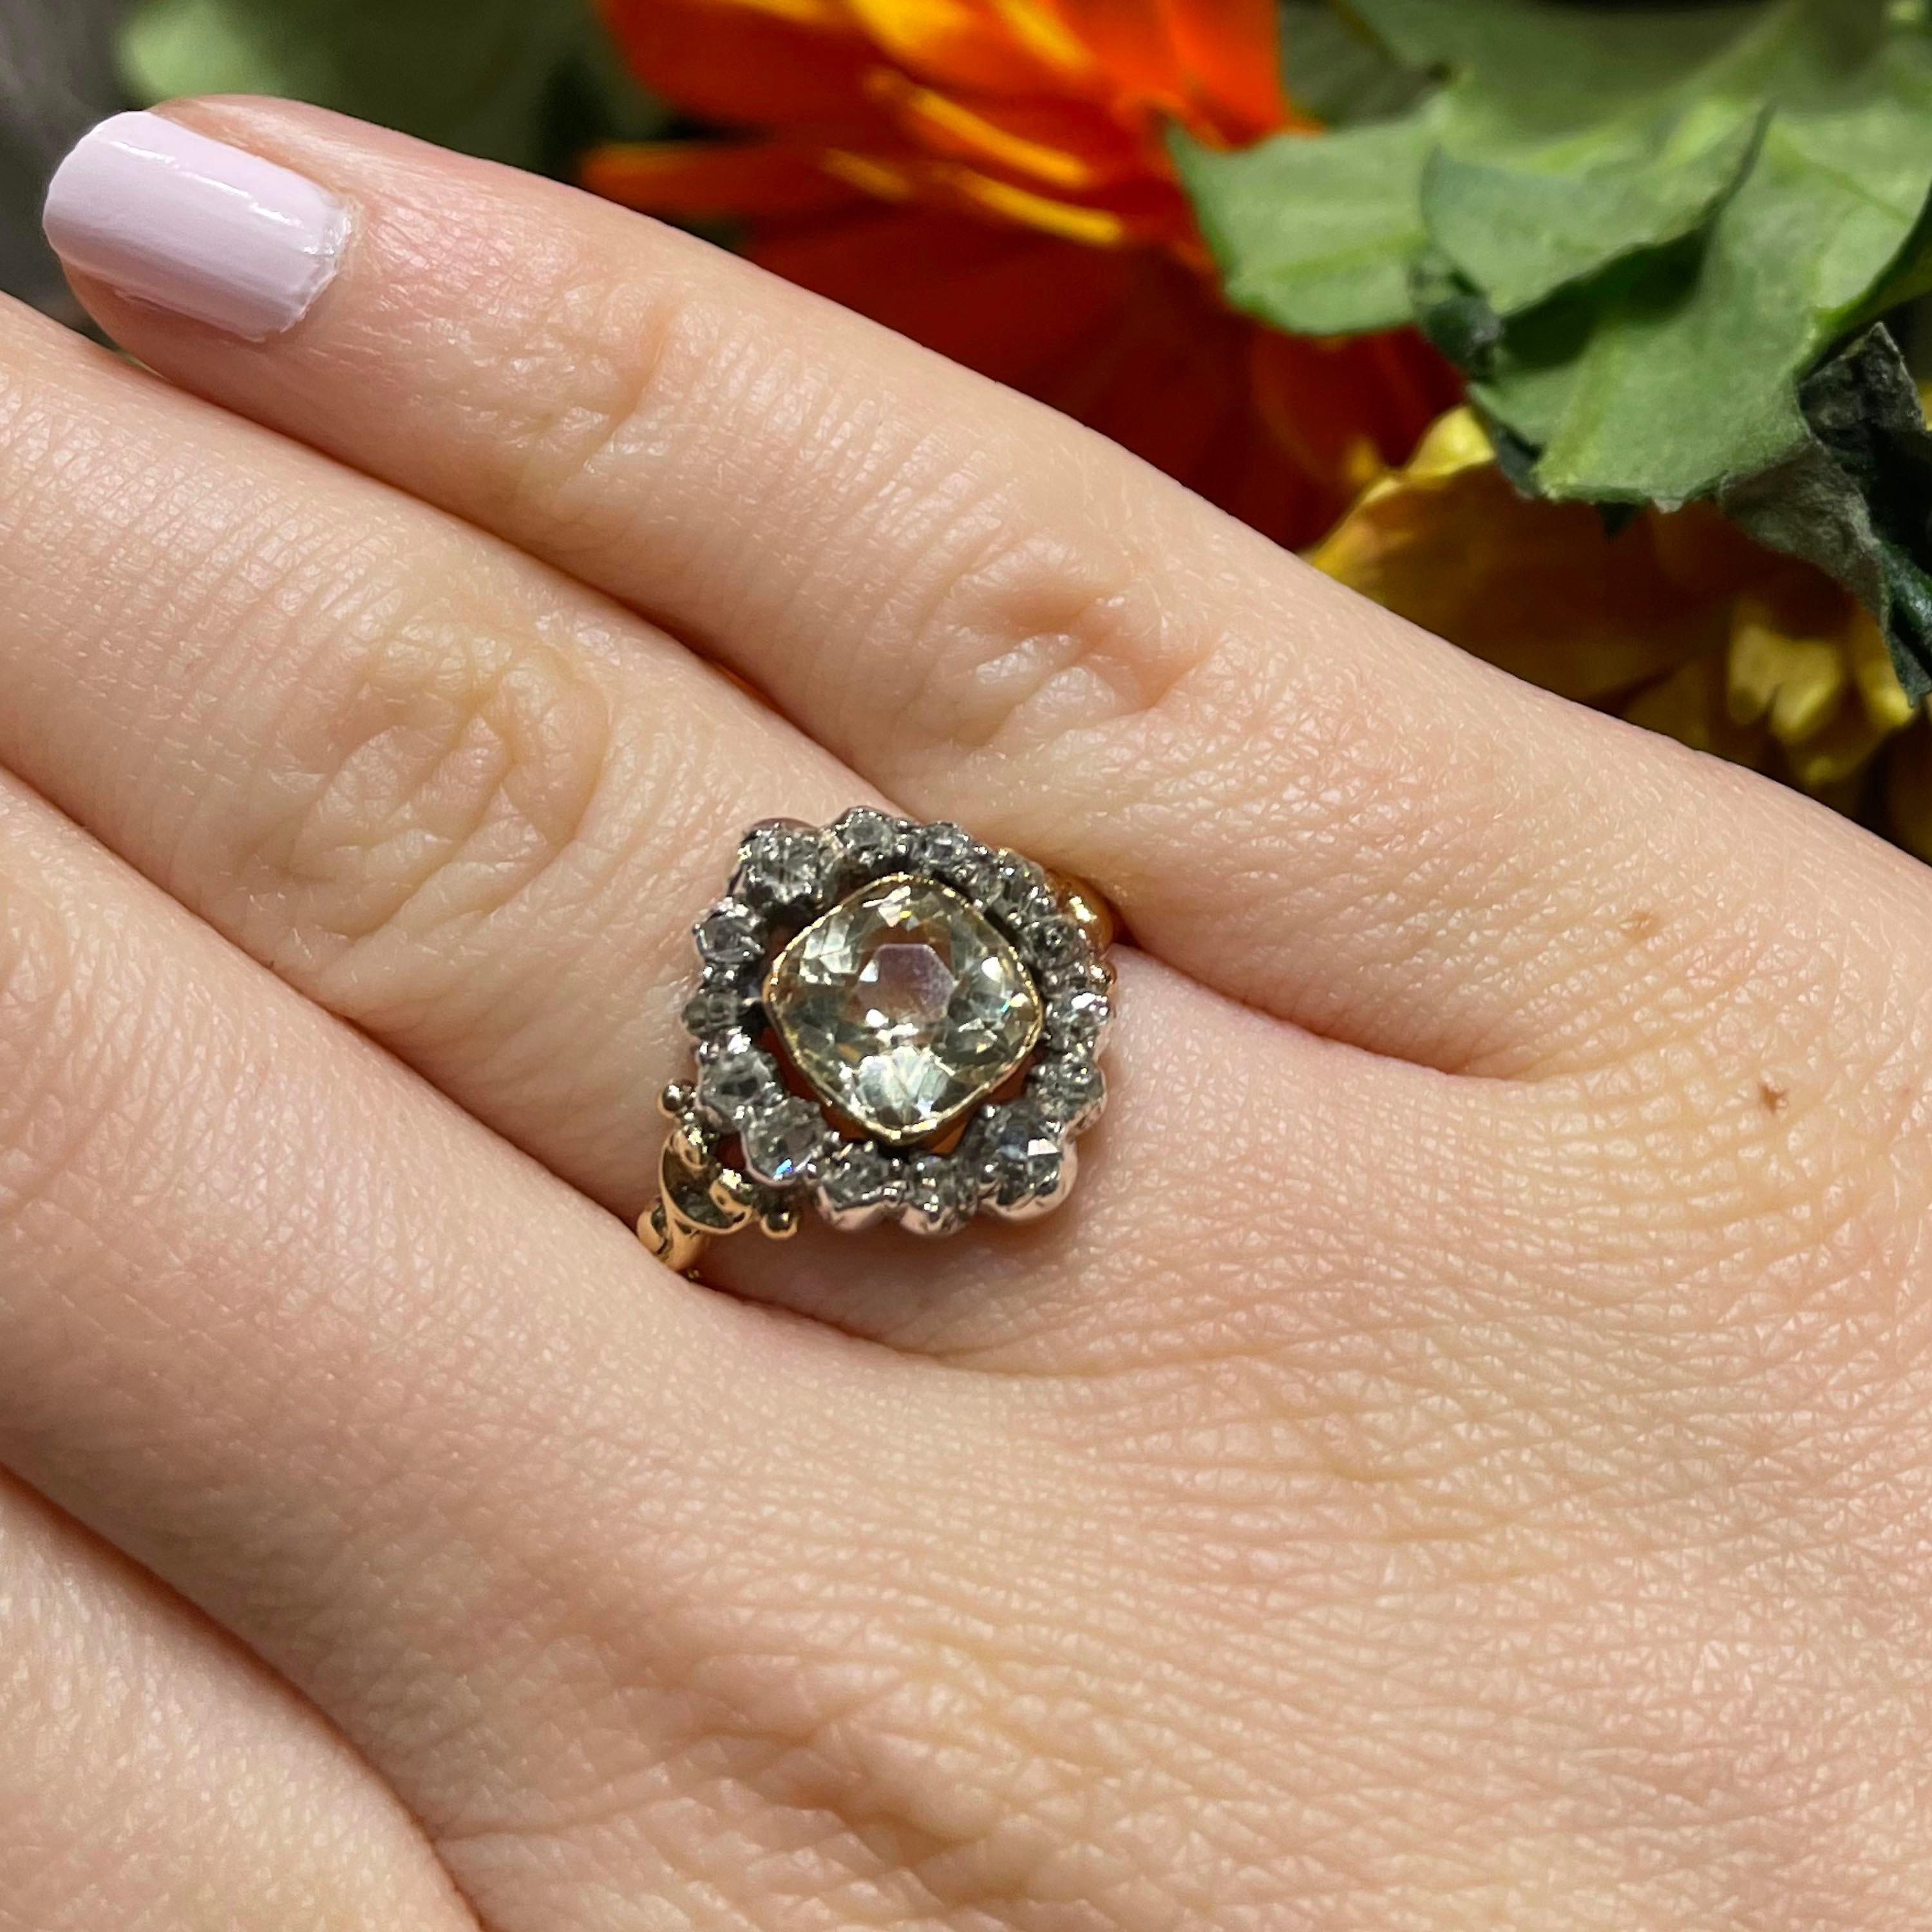 A French antique, Louis Philippe I period, cluster ring, in the Georgian style, set with a cushion cut, pale yellow, citrine, in a gold rub over setting, with an old mine-cut diamond surround, in silver, cut down, closed back settings, on a